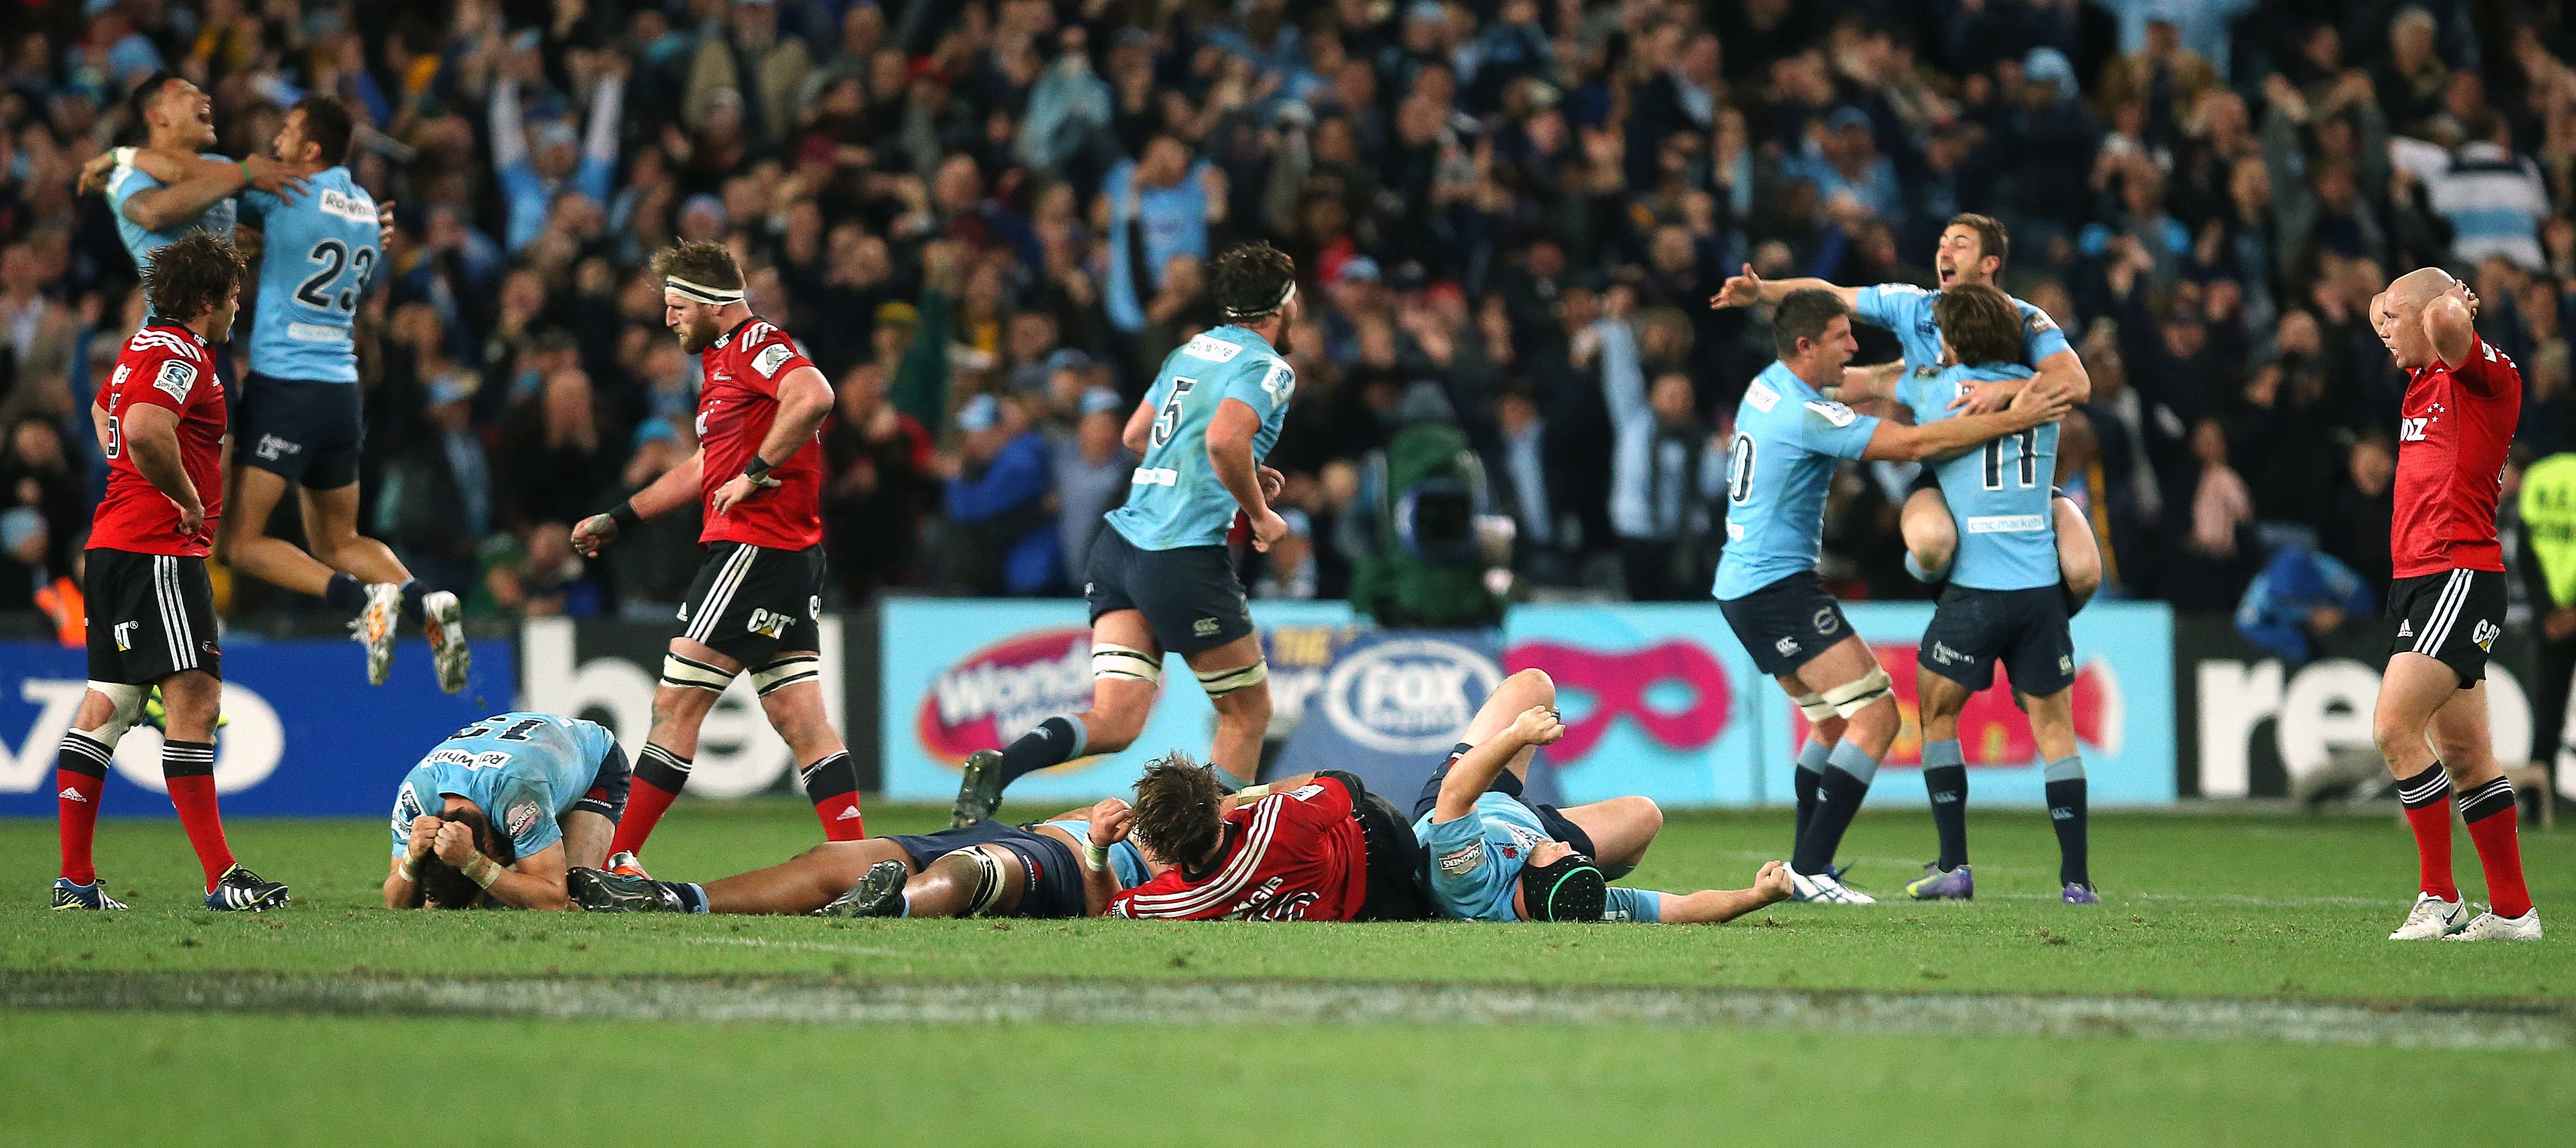 The Waratahs celebrate their 33-32 win over the Crusaders in the Super Rugby final in Sydney last year. Photo: AP